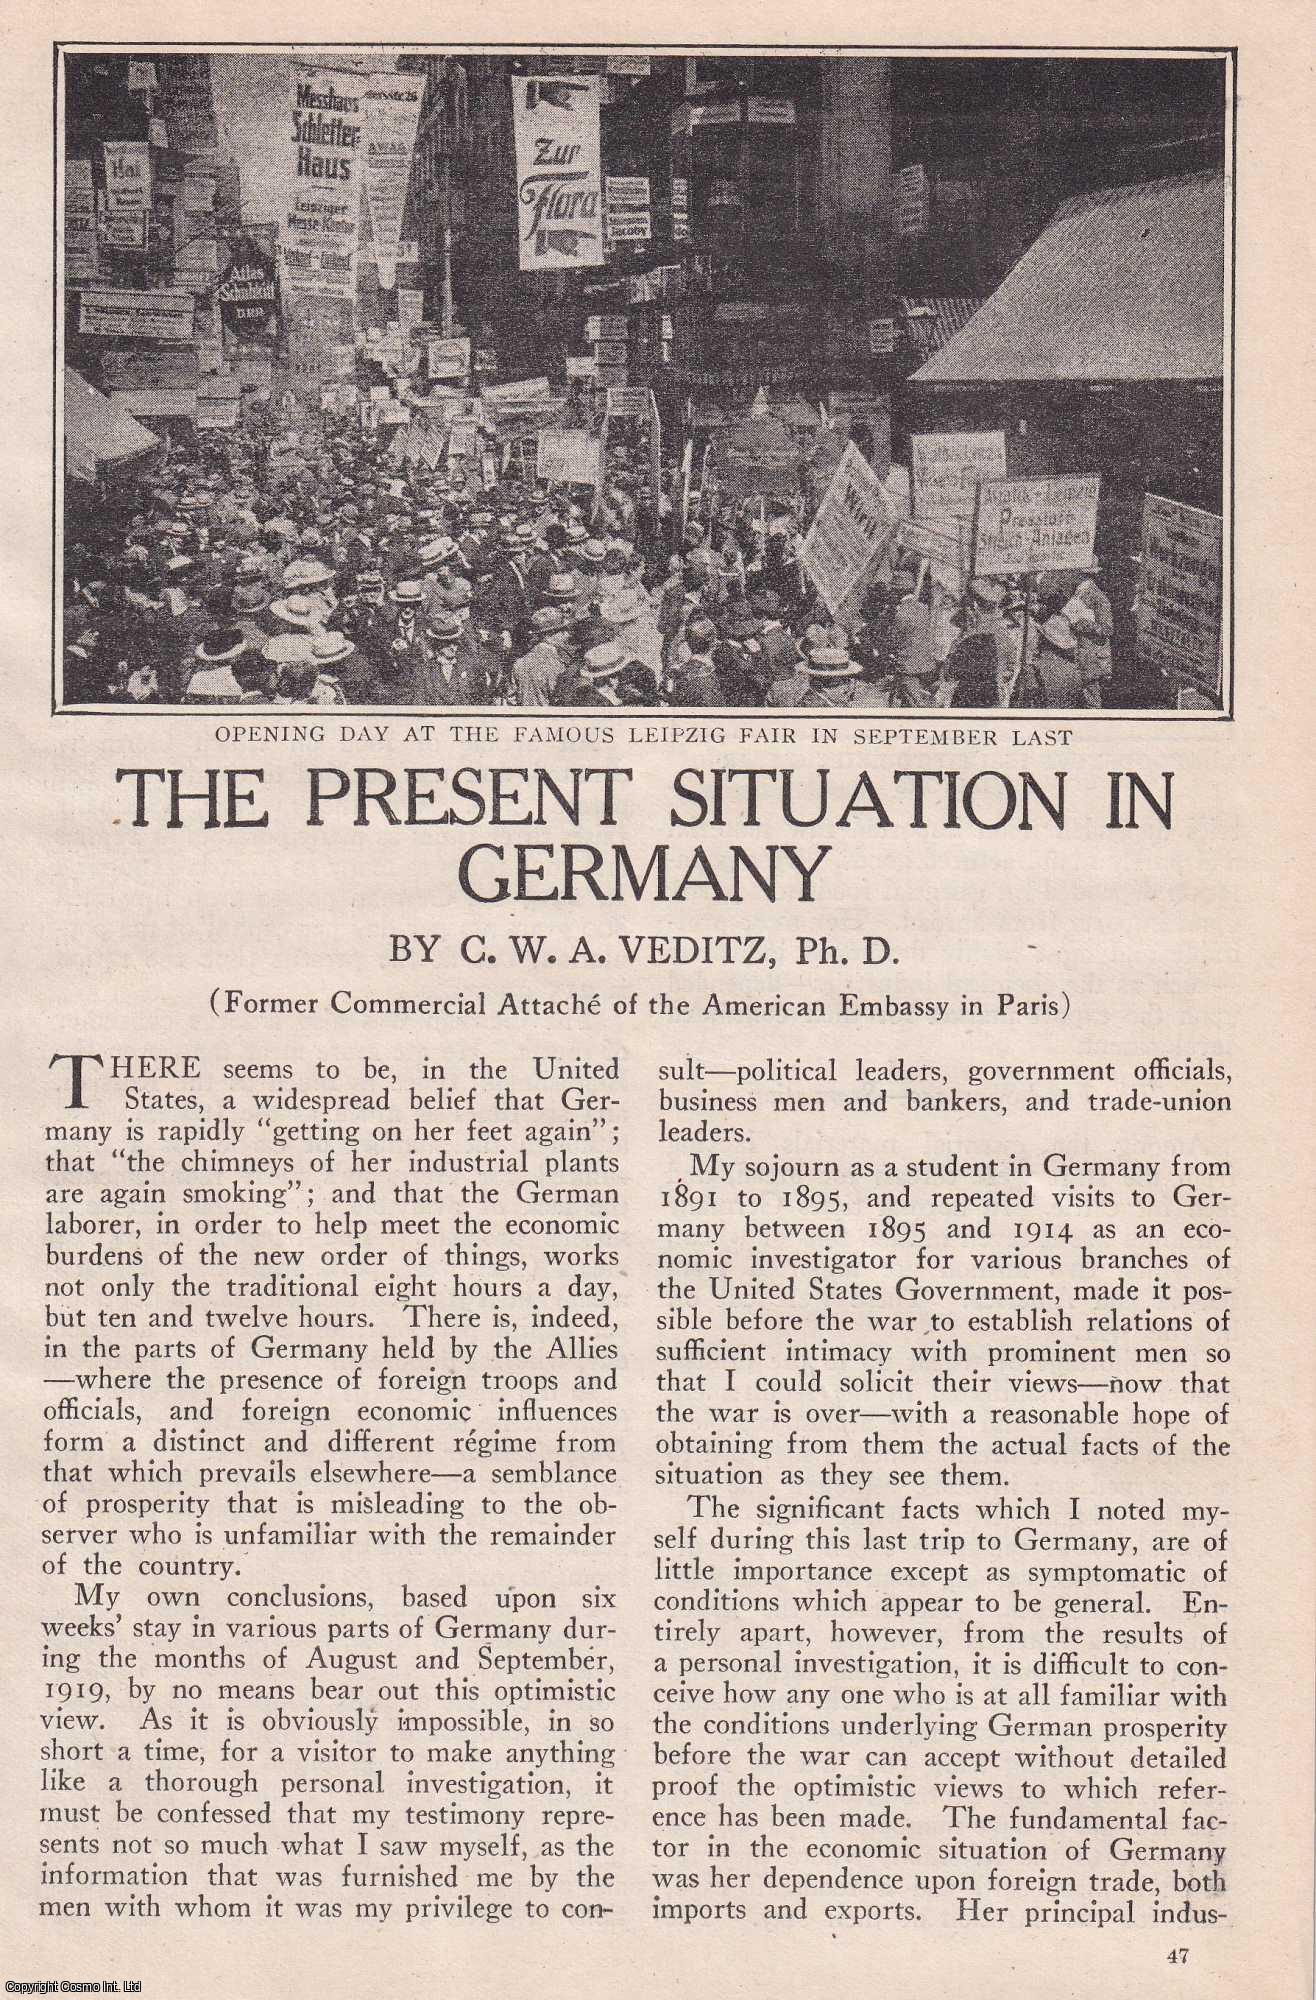 C.W.A. Veditz, Ph.D. - Germany, August & September 1919. The Present Situation in Germany. An original article from the American Review of Reviews, 1920.